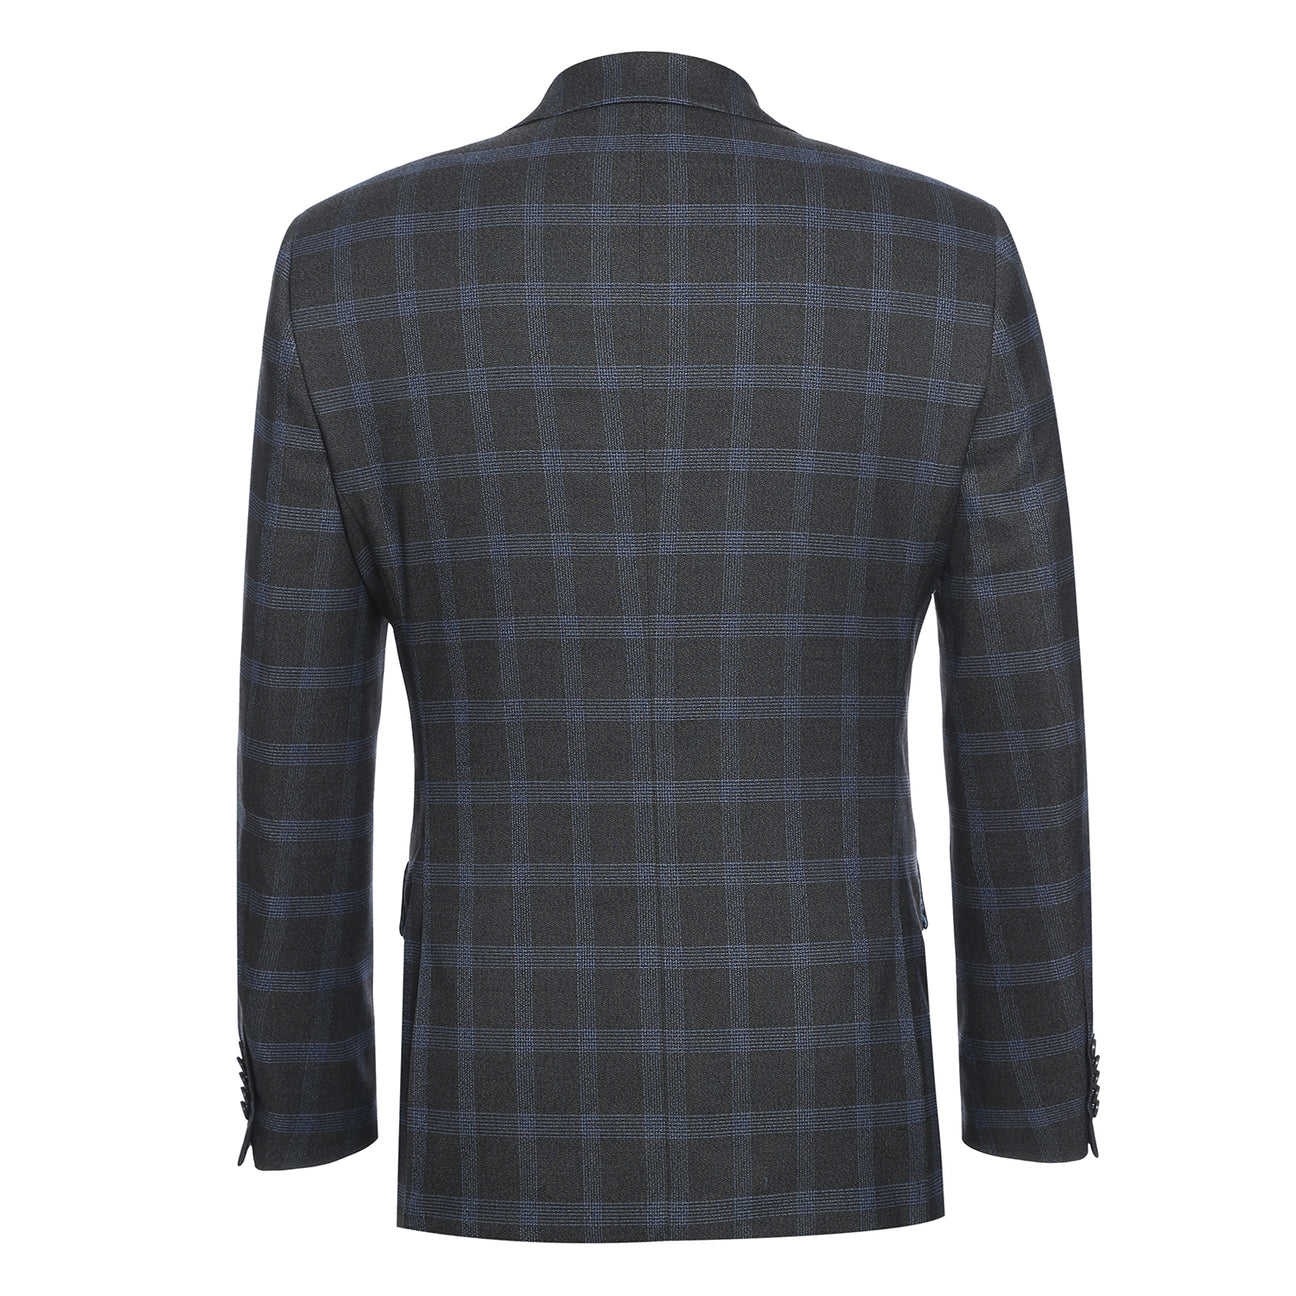 ENGLISH LAUNDRY Charcoal with Blue Check Notch Suit 72-55-095